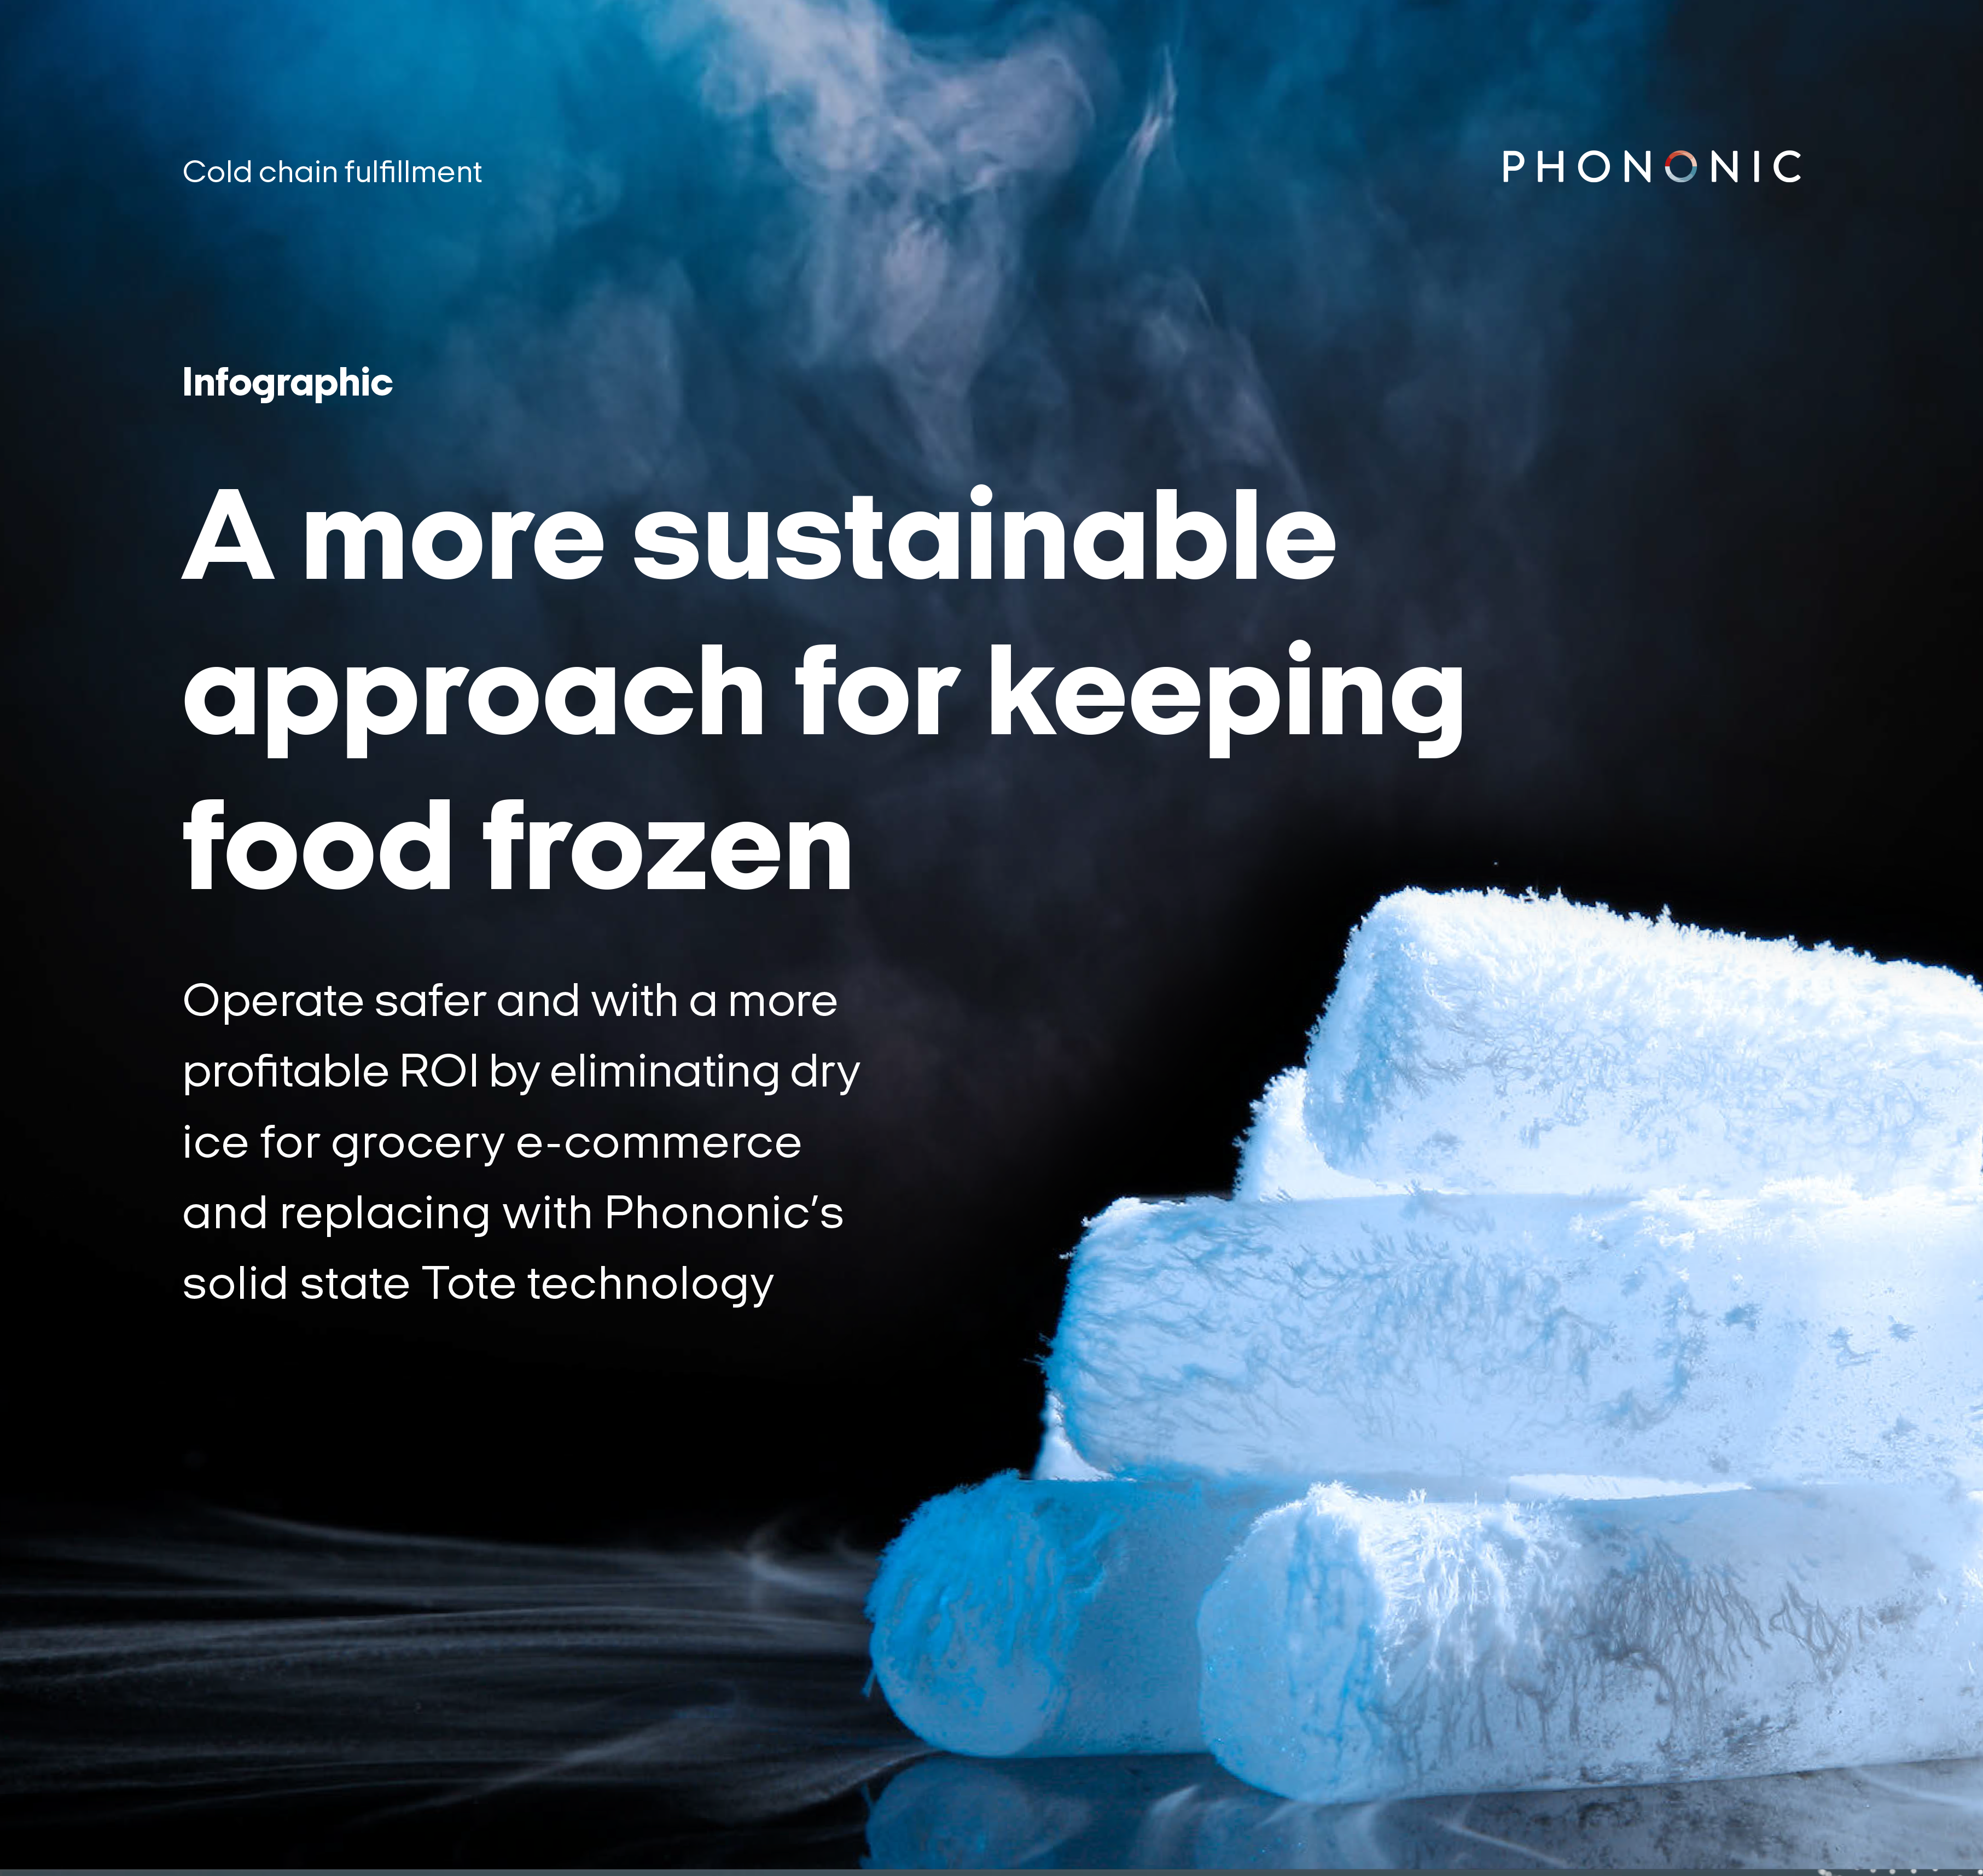 A more sustainable approach for keeping food frozen